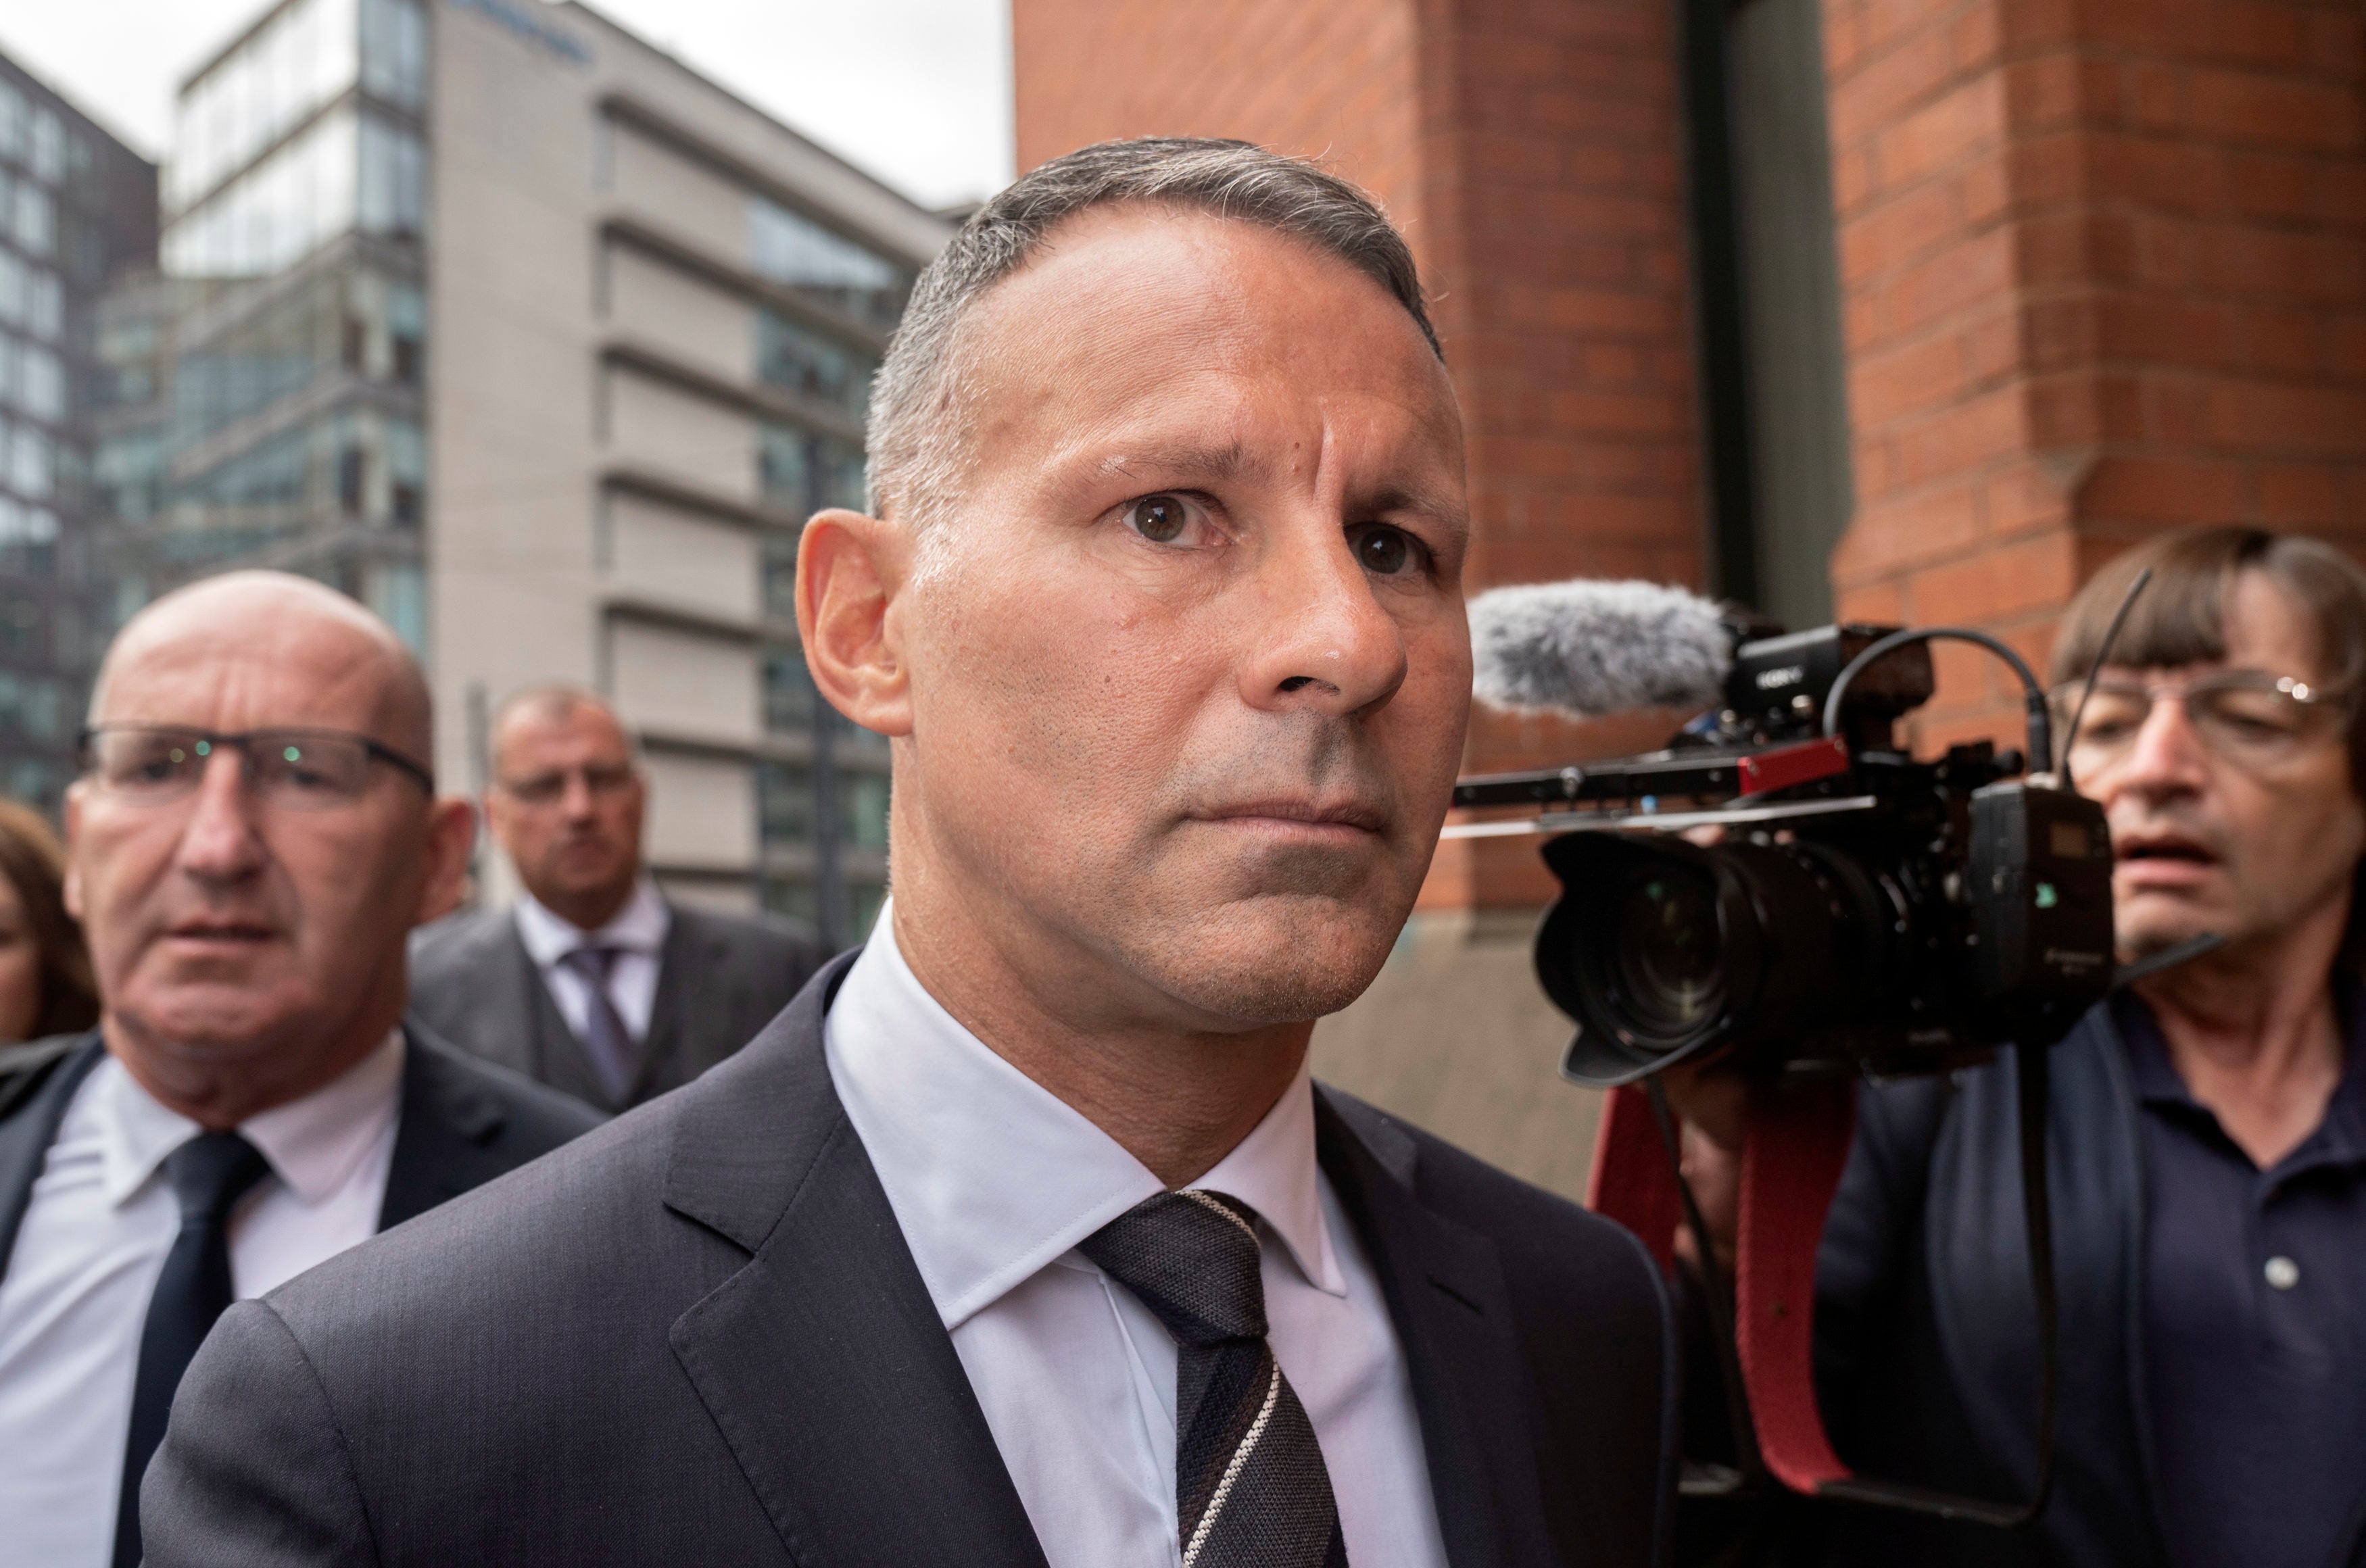 Ryan Giggs arrives at court Minshull Street Crown Court in Manchester